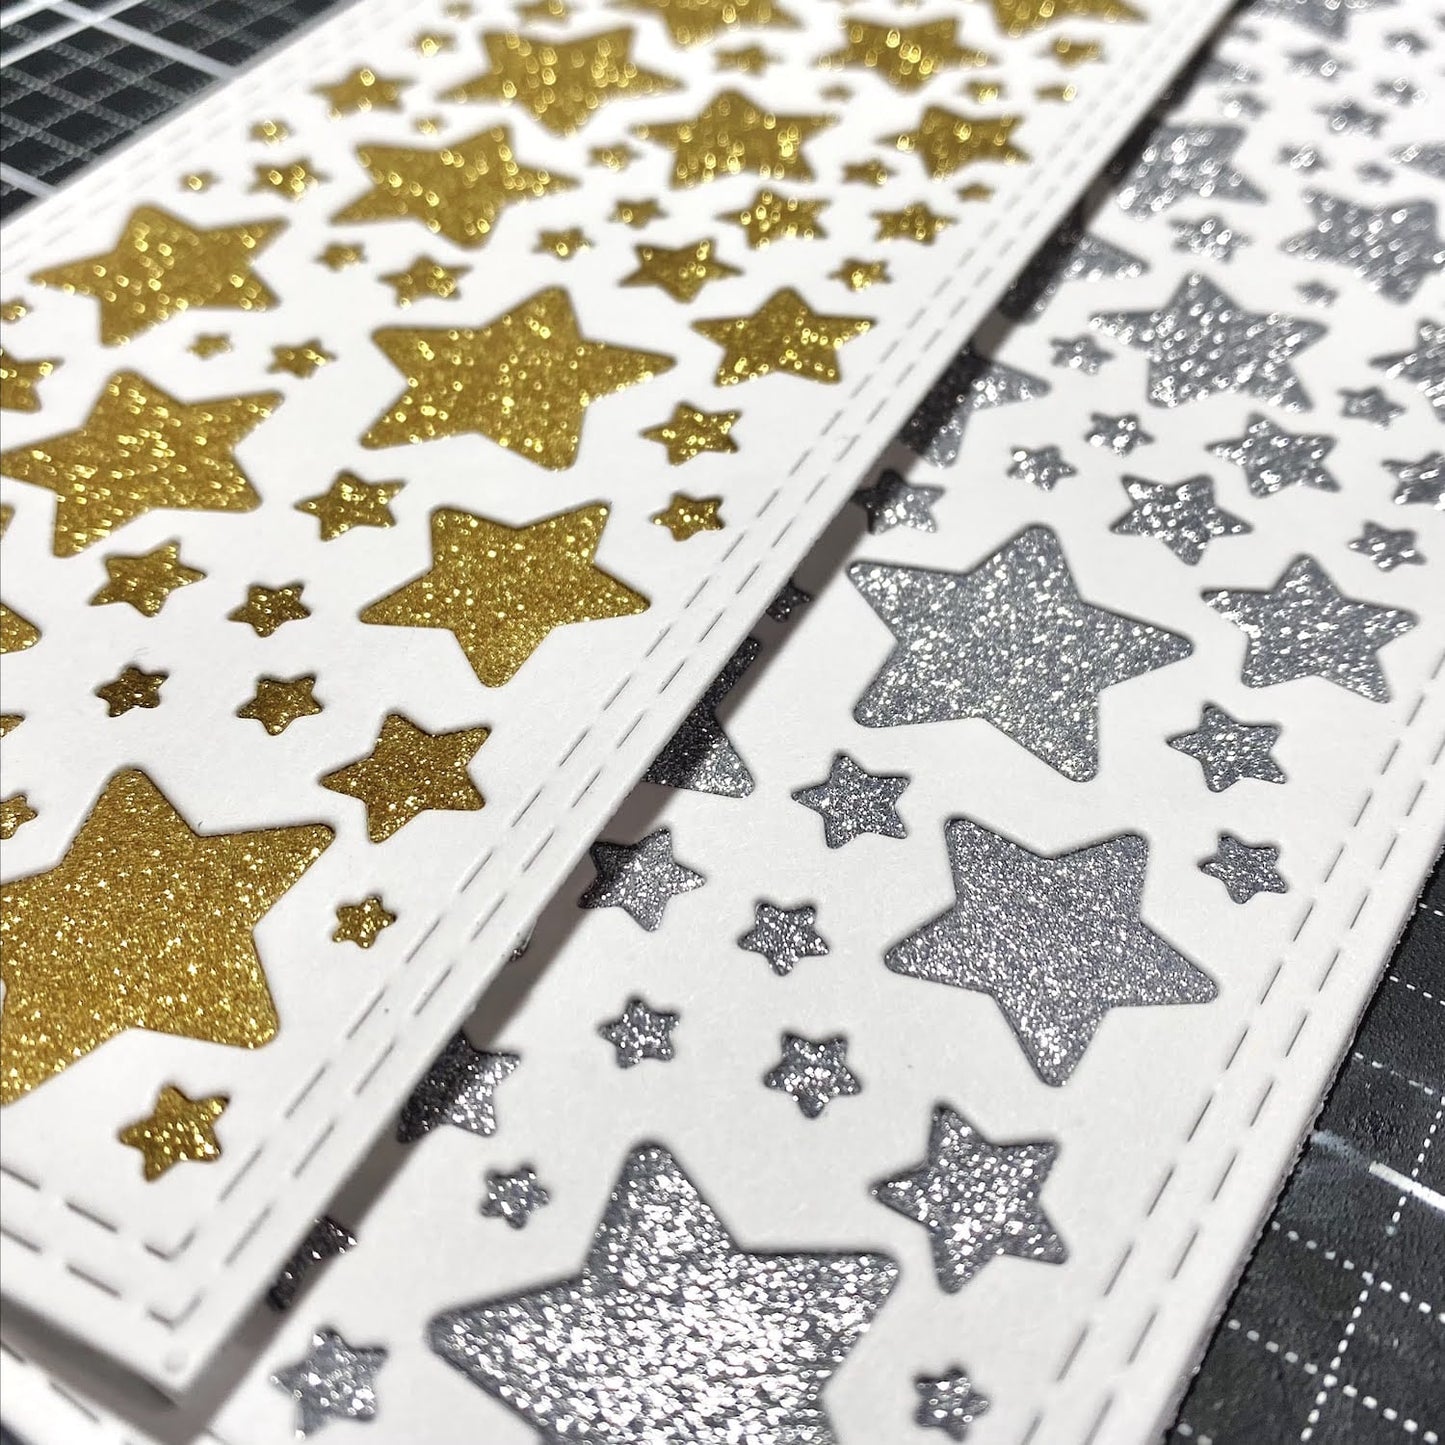 rose gold glitter cardstock, rose gold glitter cardstock Suppliers and  Manufacturers at